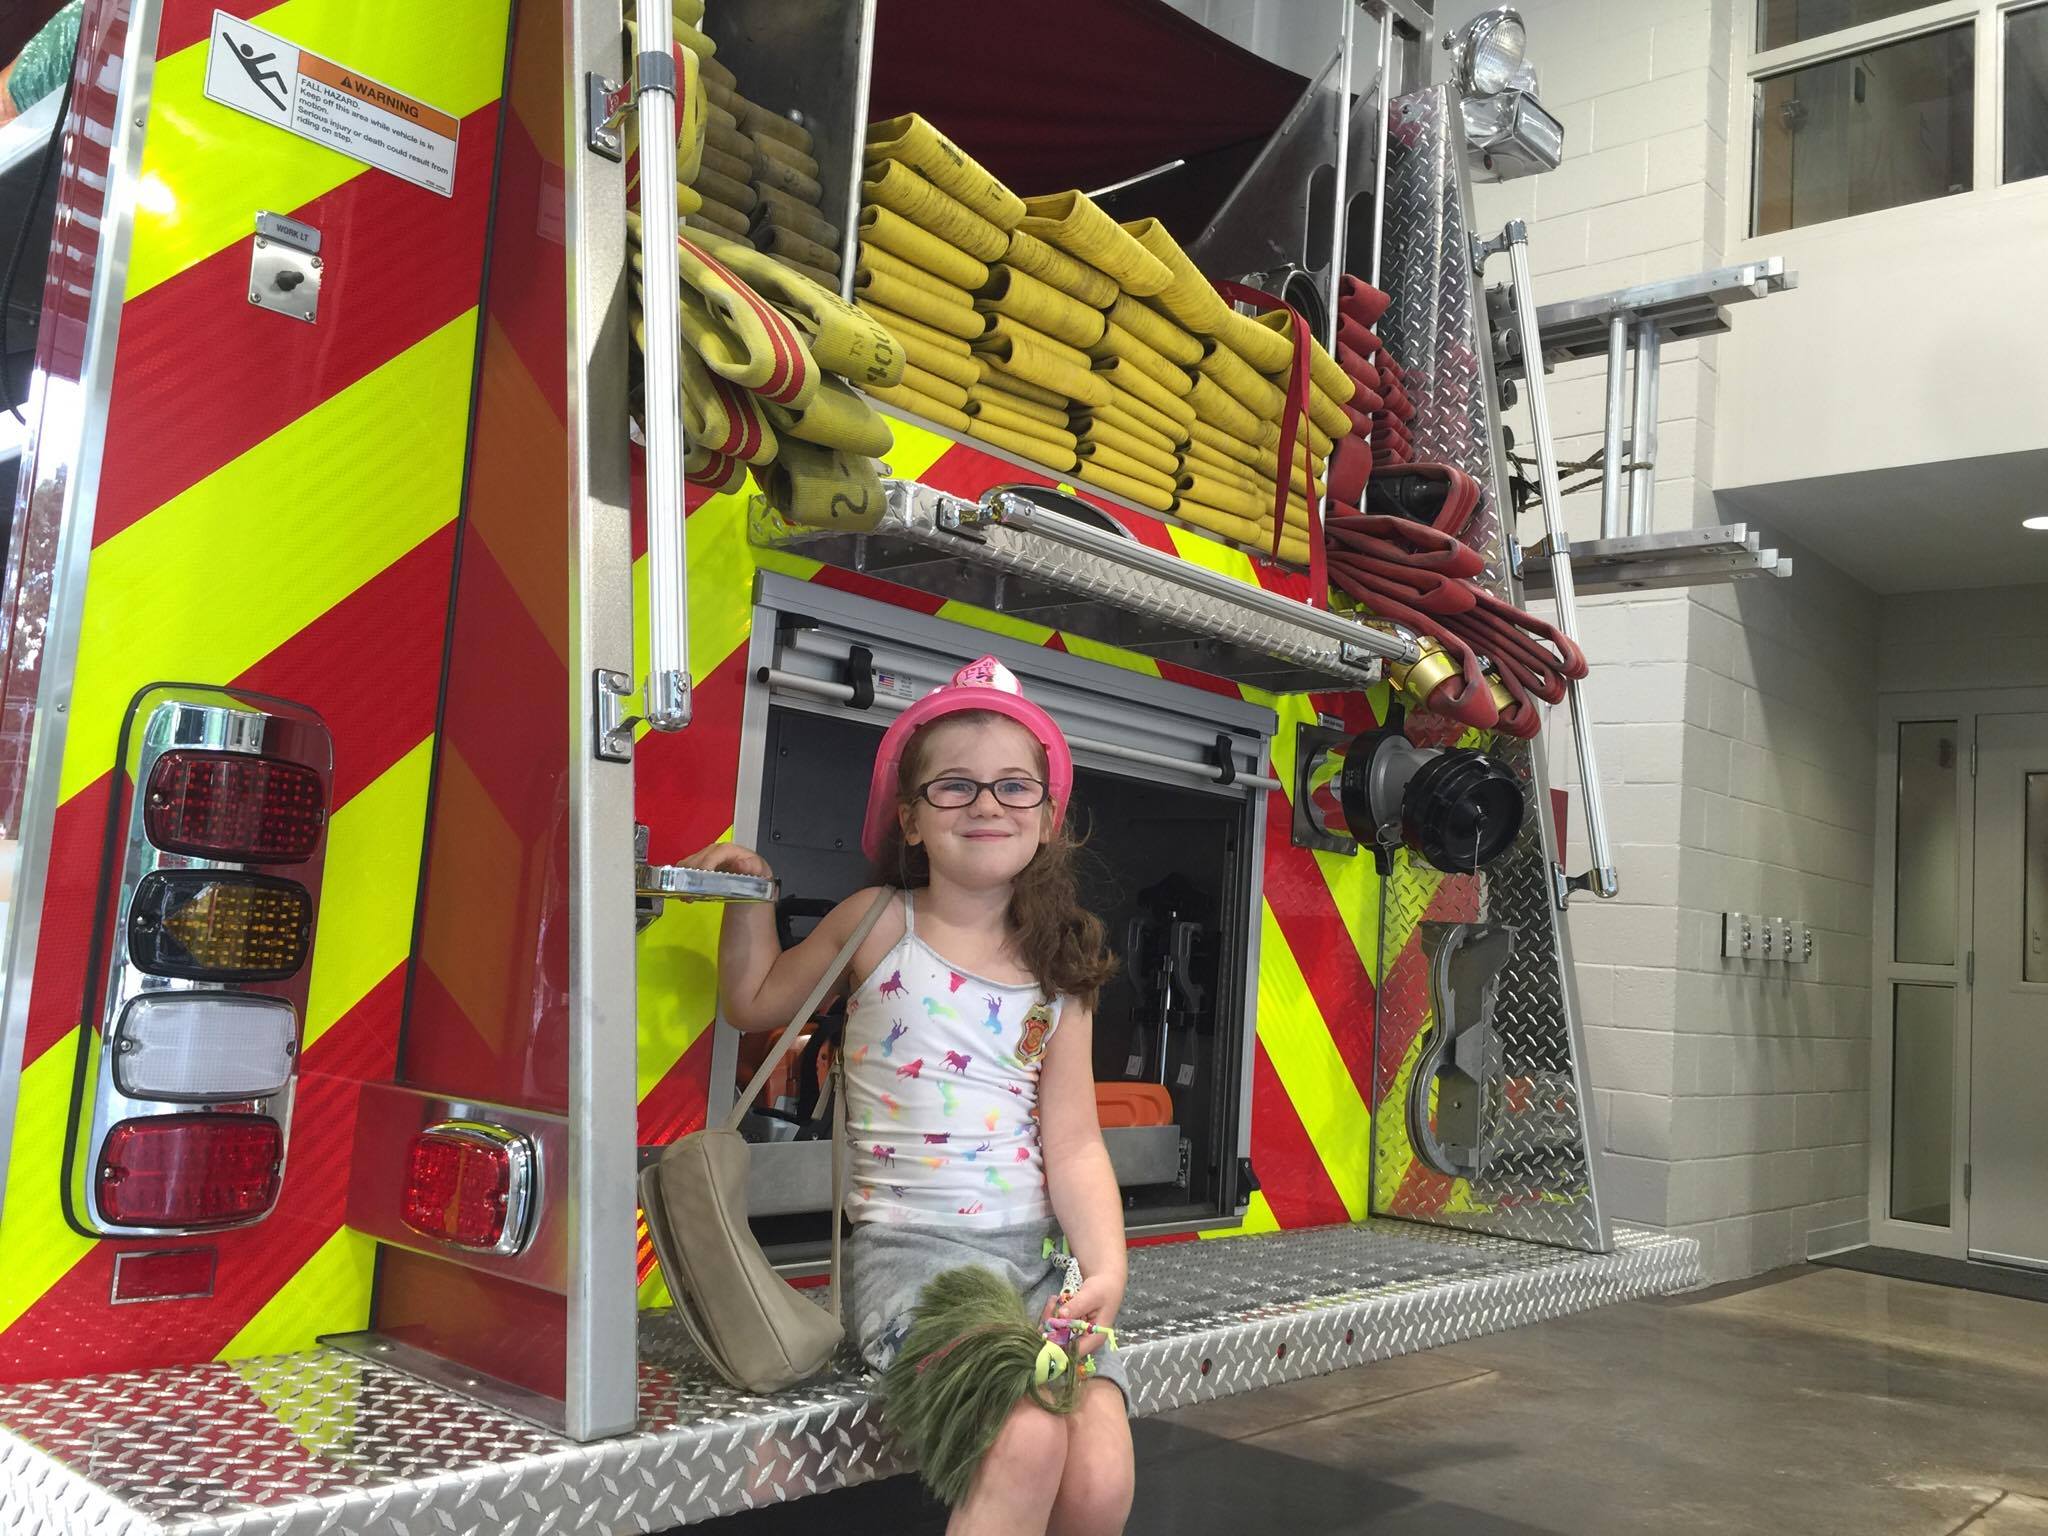 Six and a half year old Maddy poses with the fire truck.